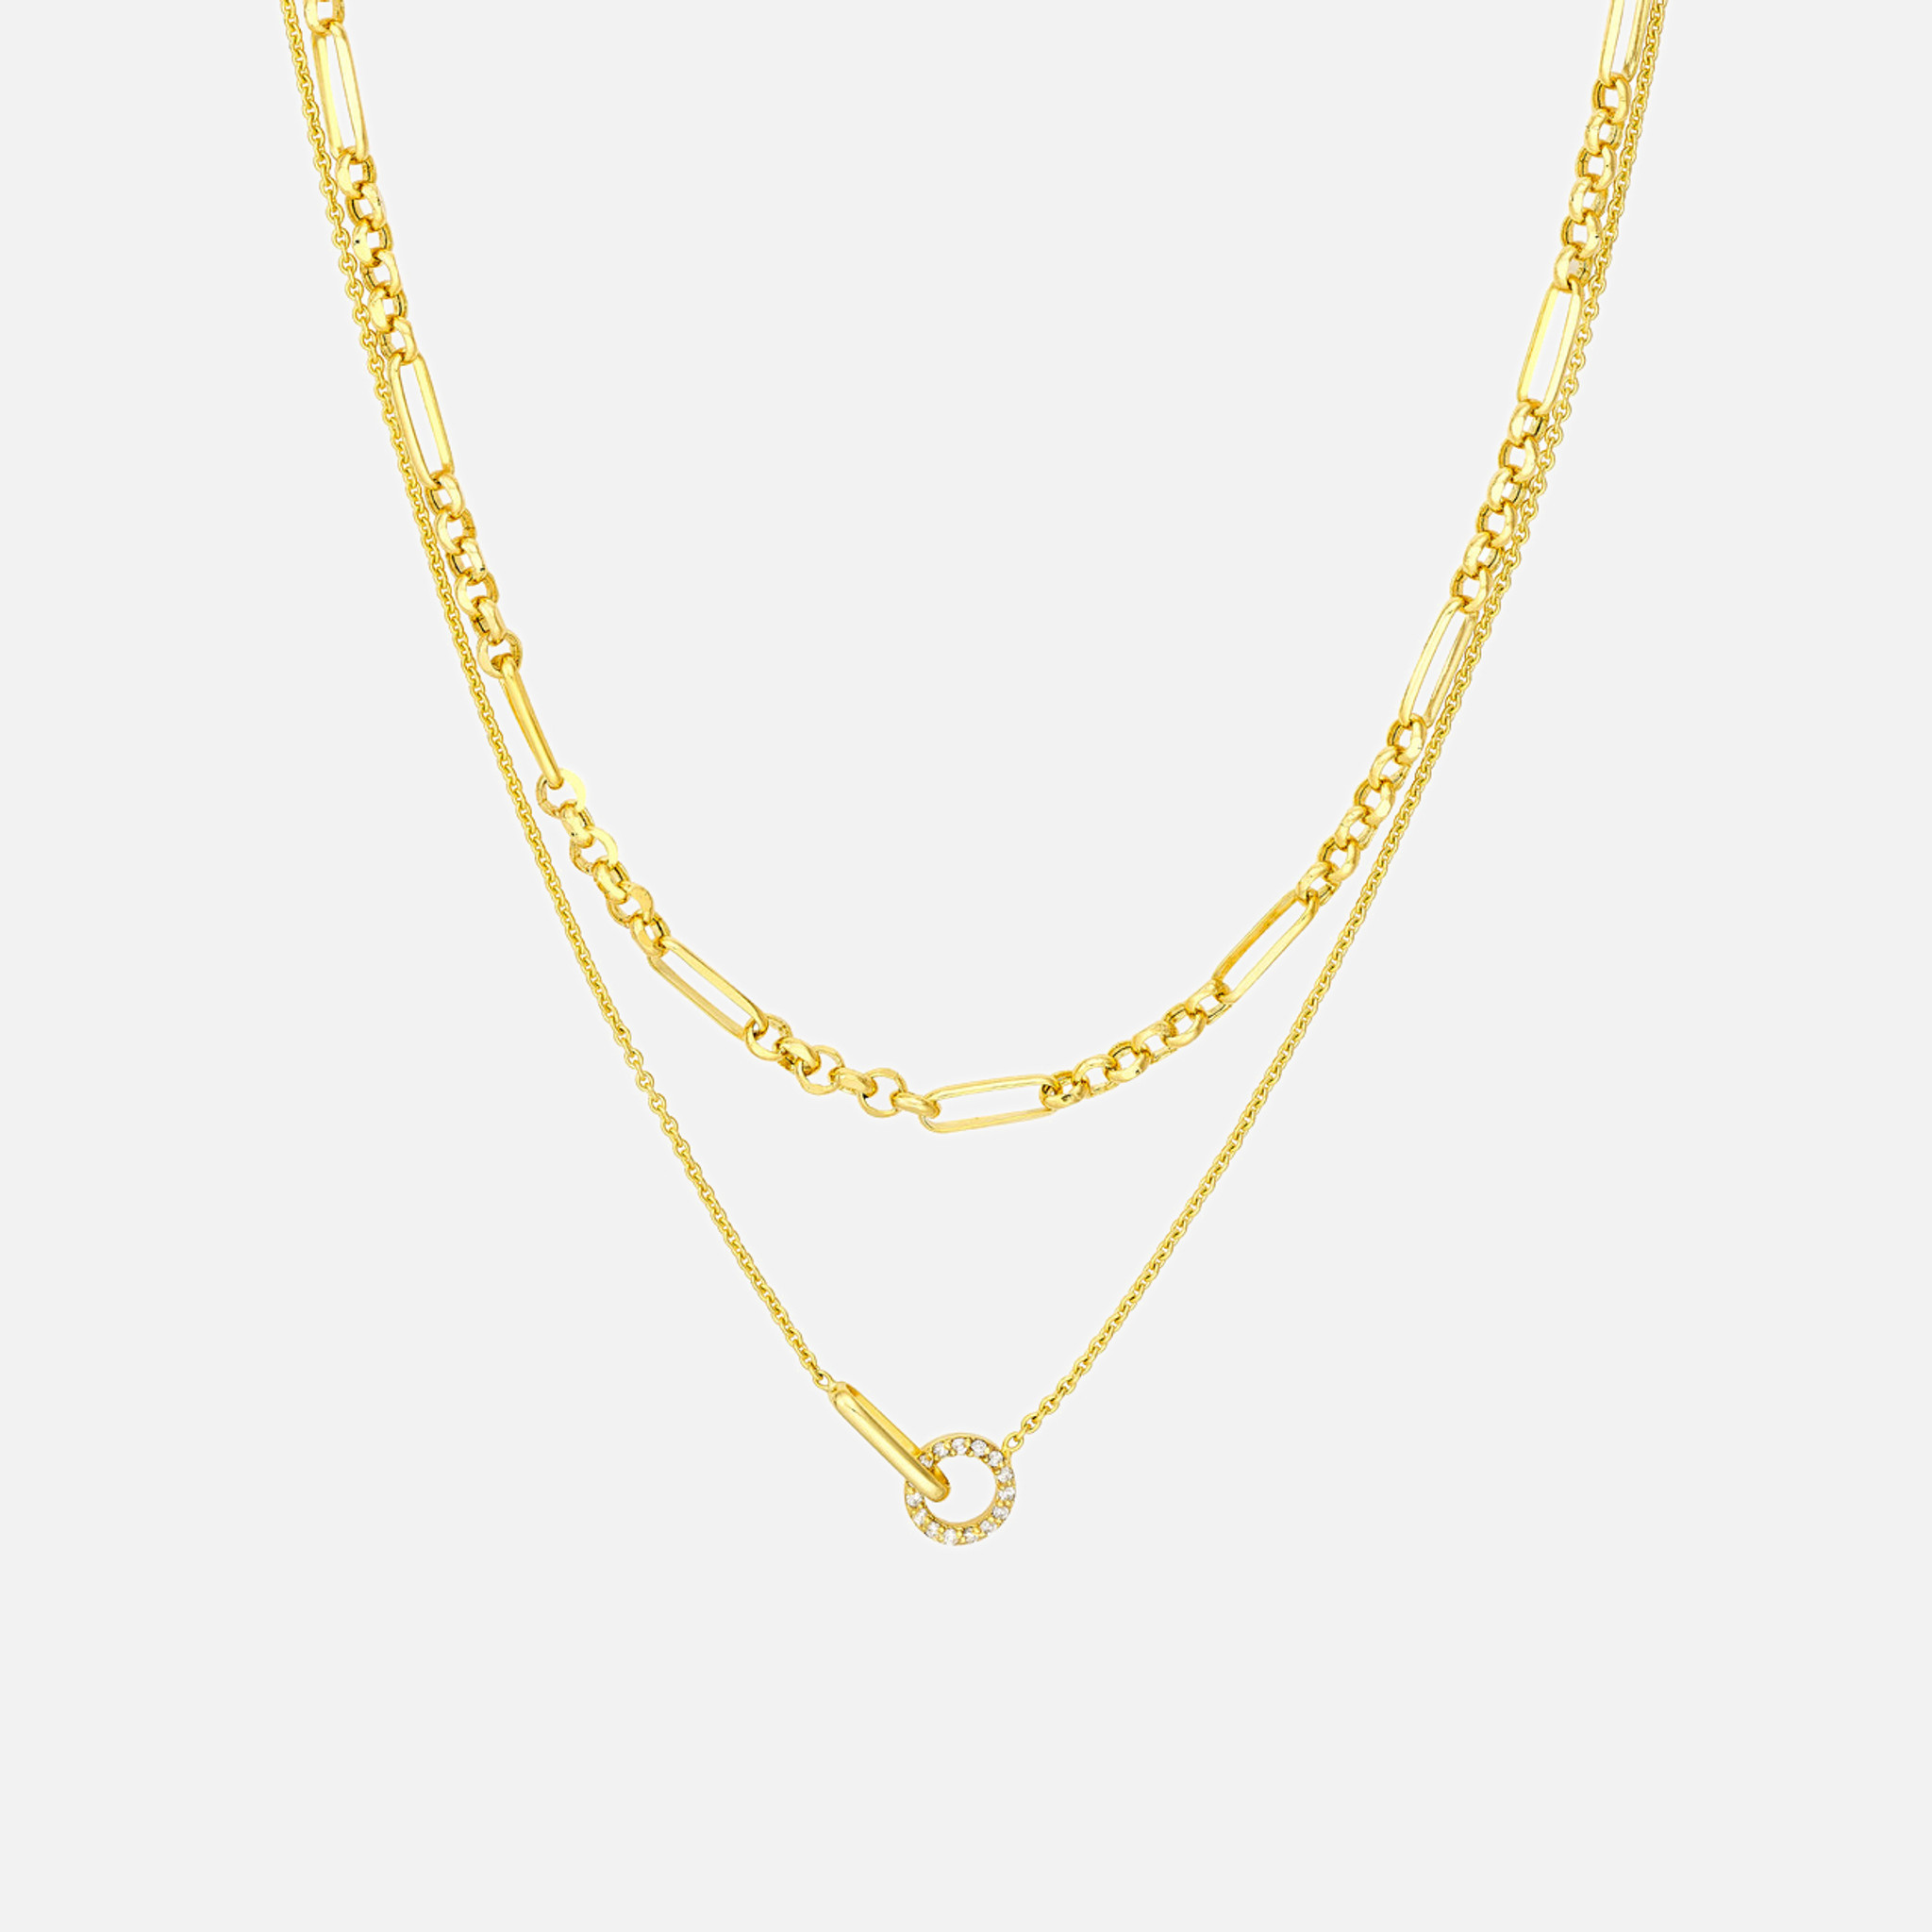 Seamless diamond strand necklace hanging, displaying effortless sophistication and modern design.